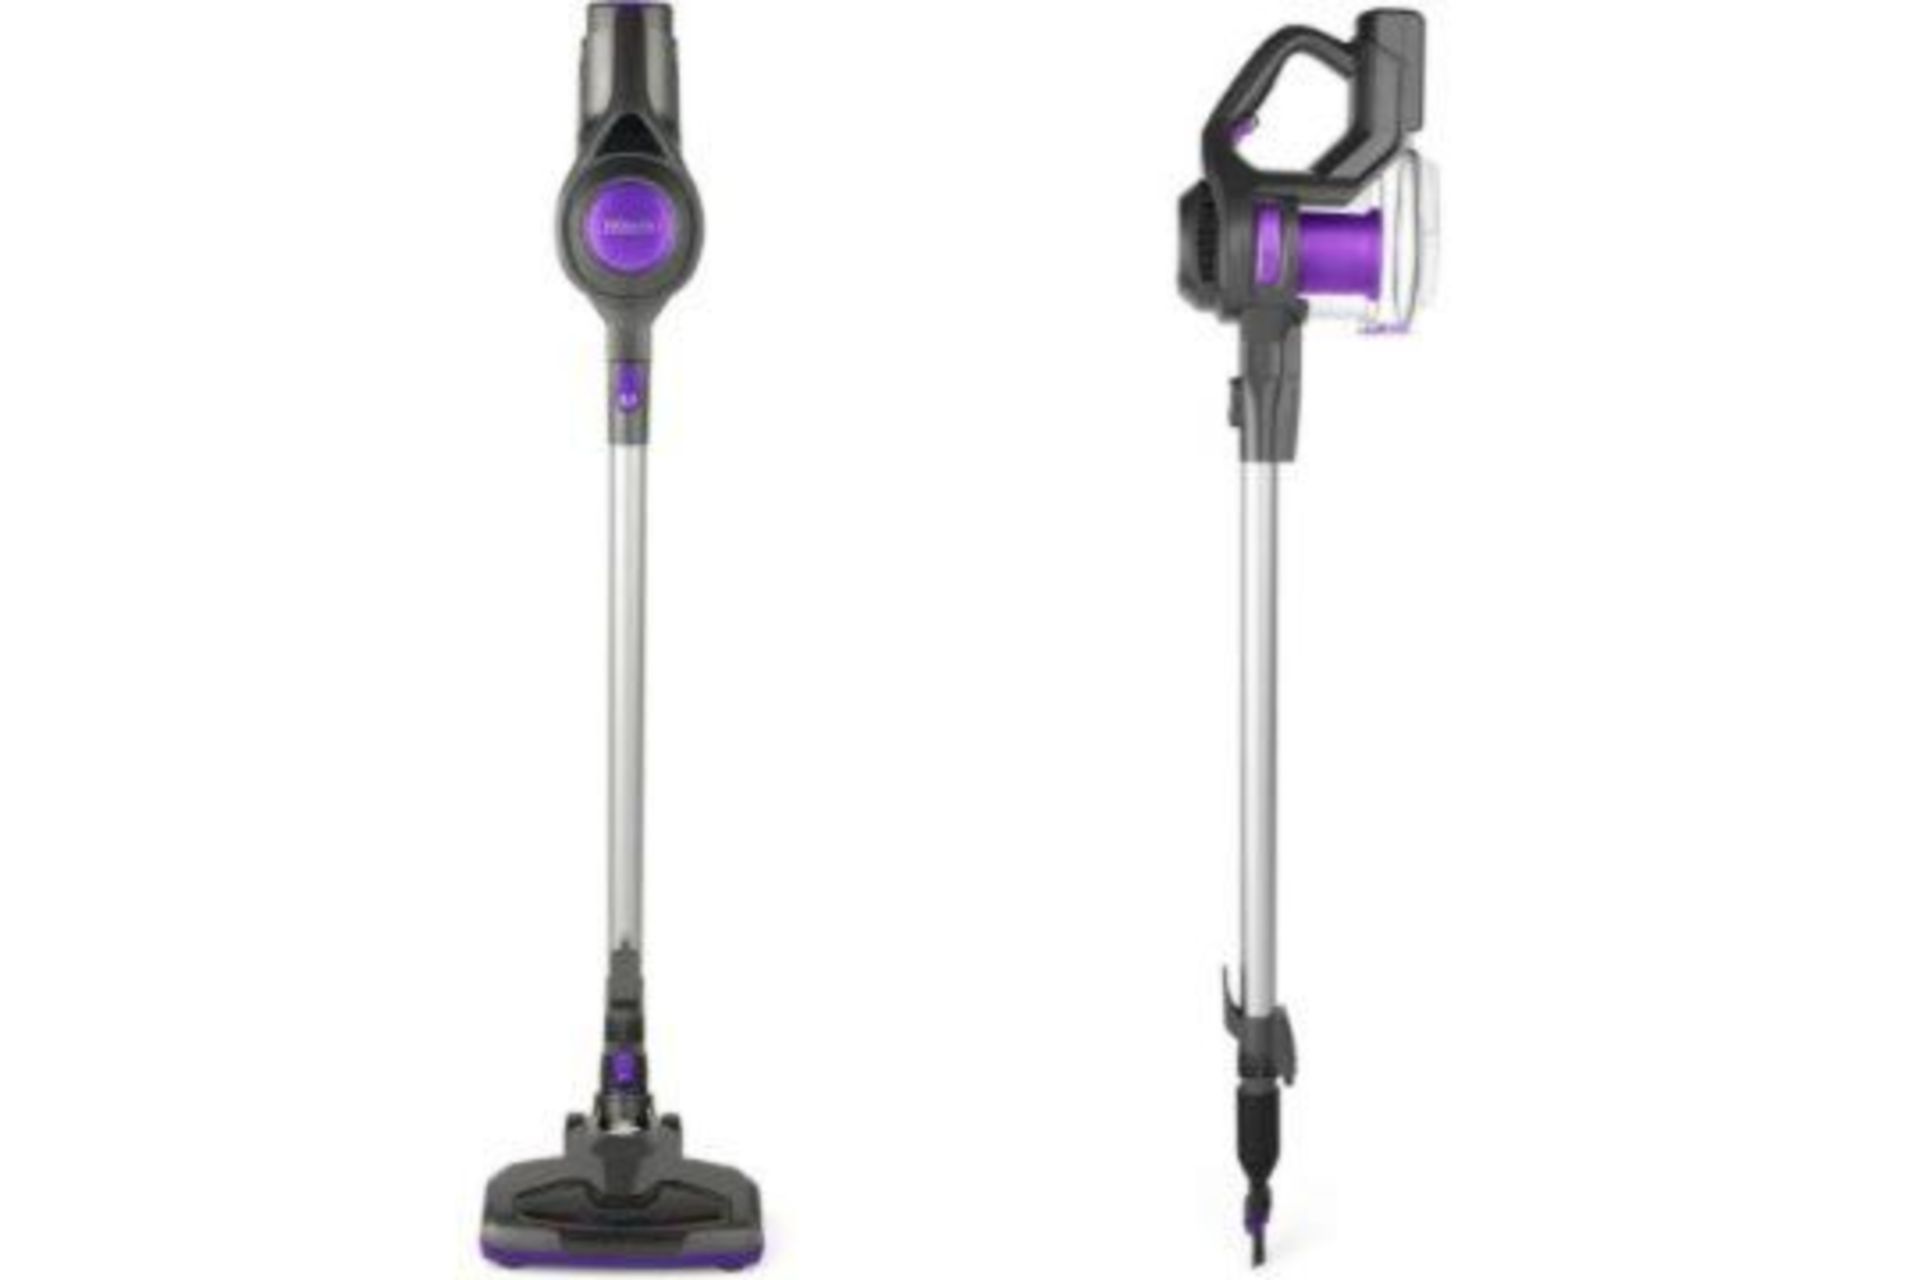 BRAND NEW PROLECTRIX 2 IN 1 CORDLESS PRO VACUUM CLEANER WITH 2 IN 1 BRUSH